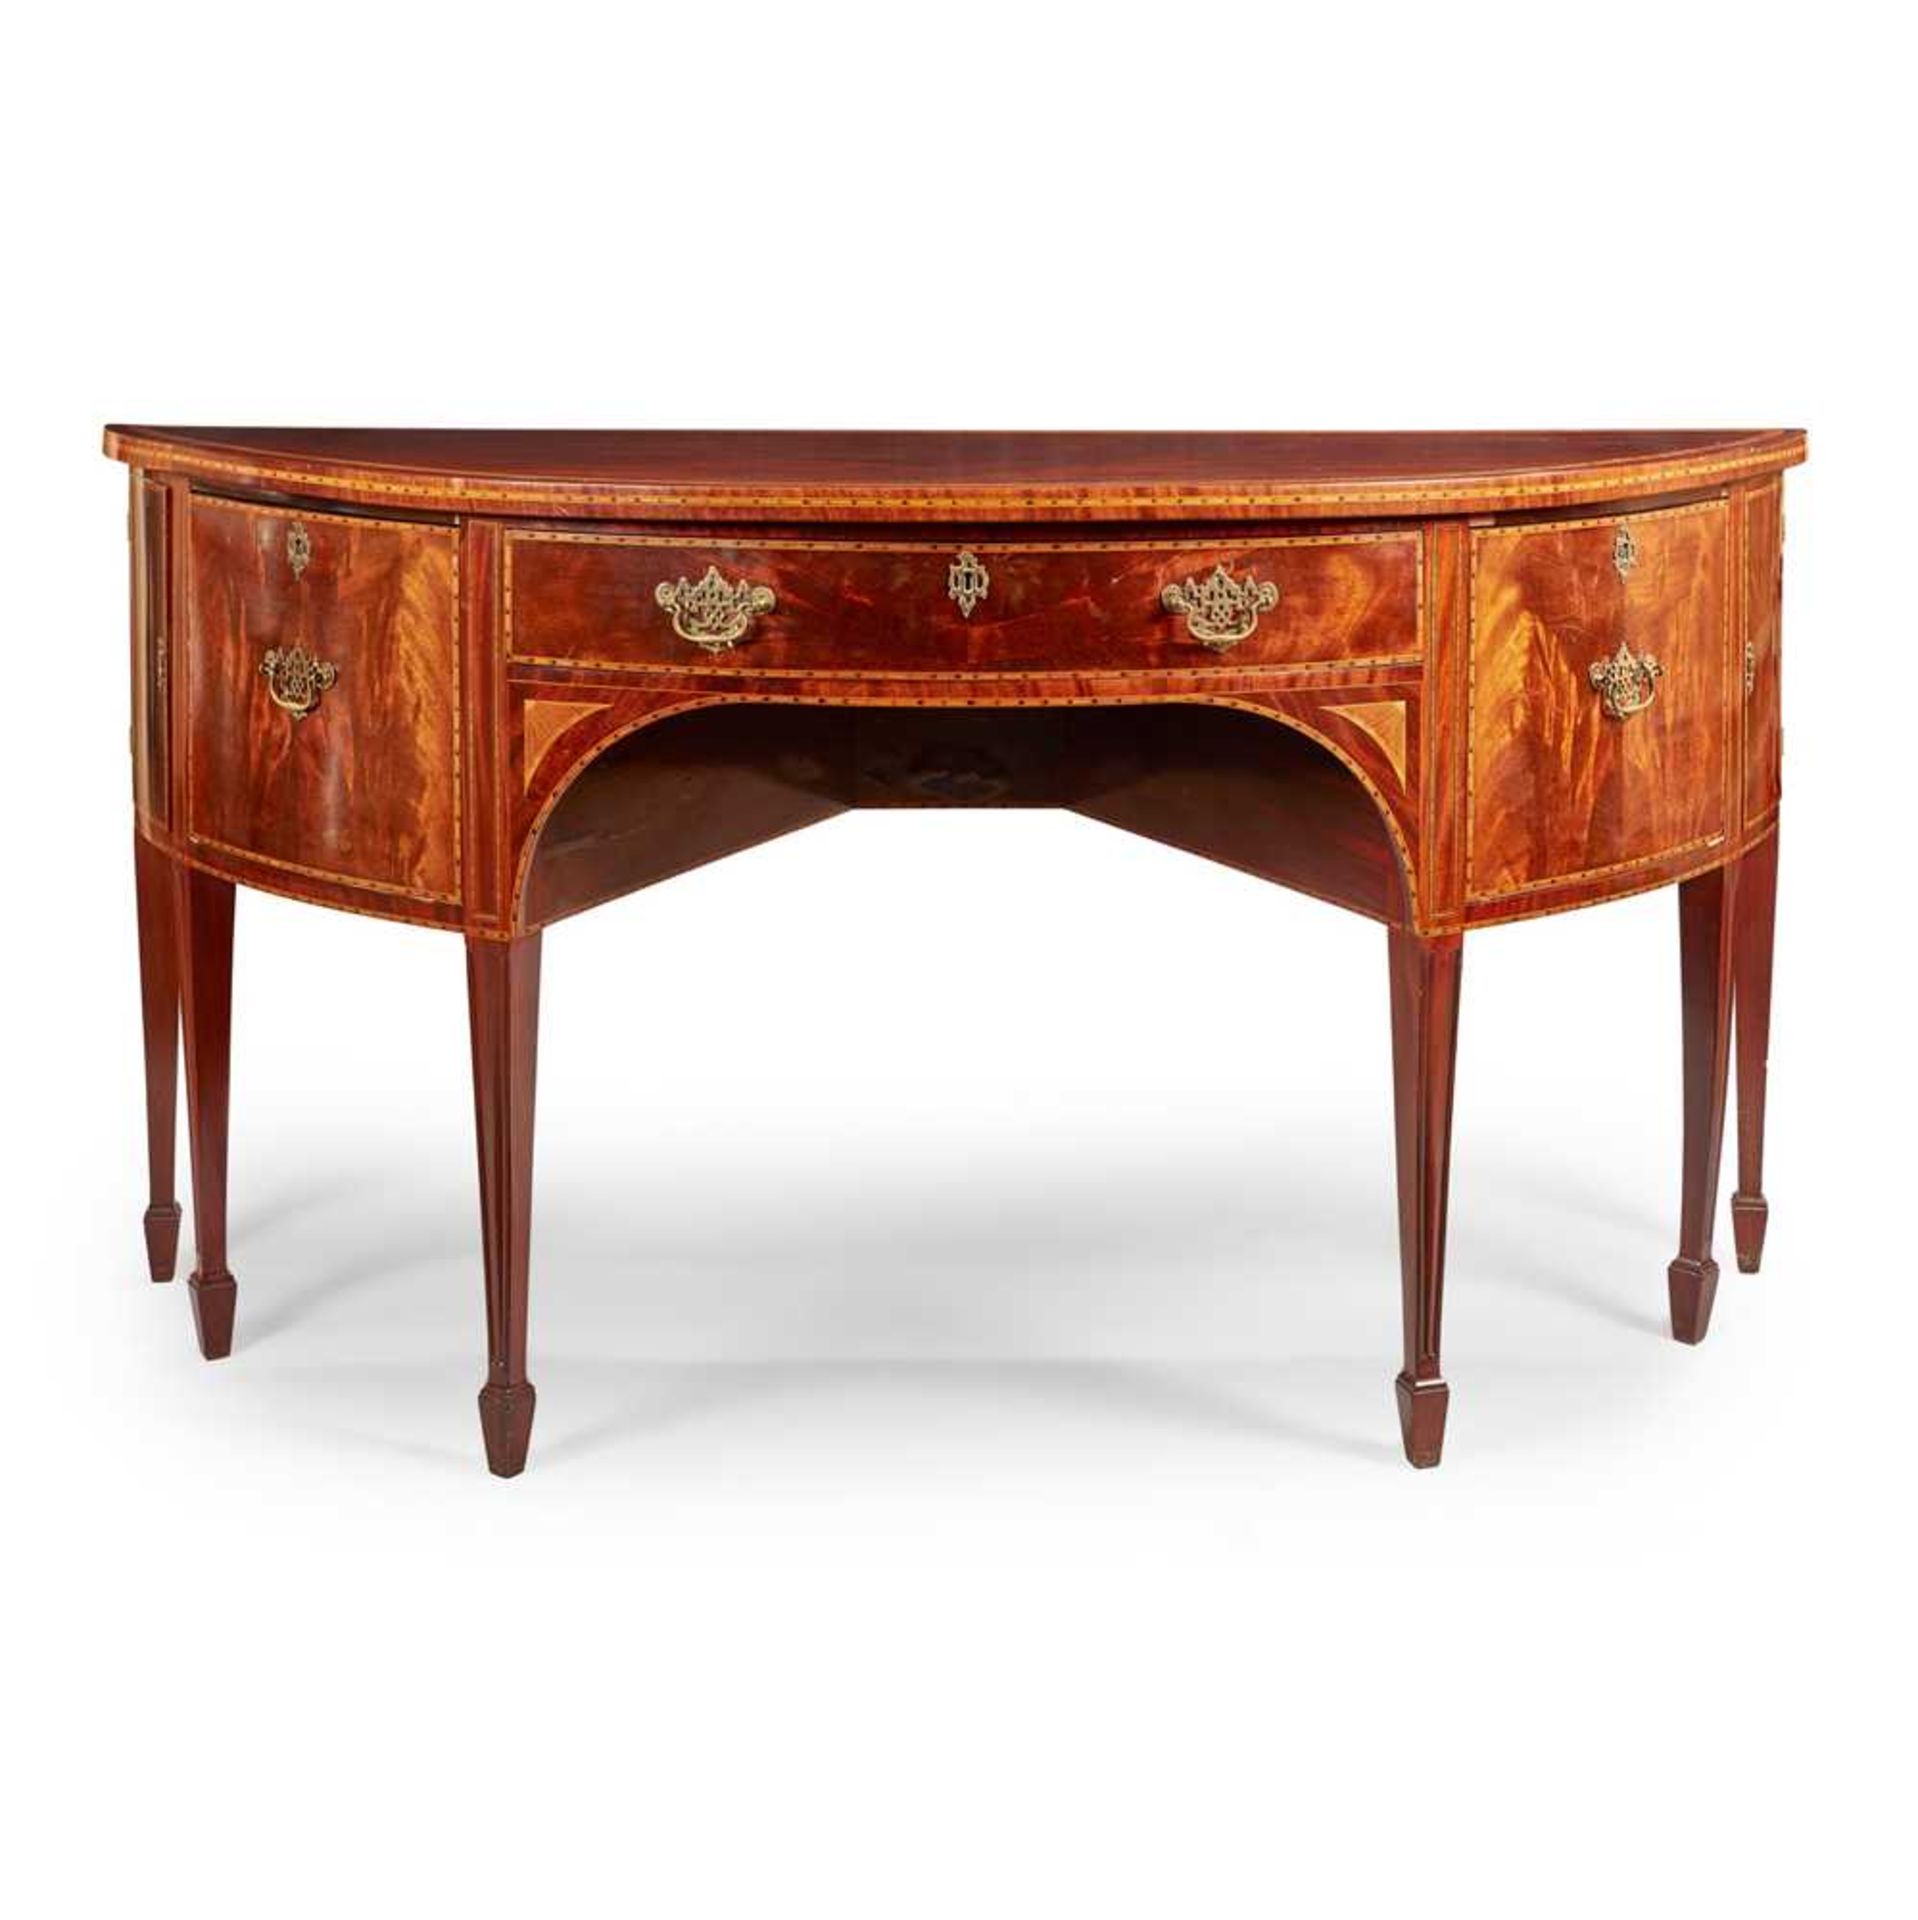 A GEORGIAN STYLE MAHOGANY AND SATINWOOD CROSSBANDED BOWFRONT SIDEBOARD MID 19TH CENTURY